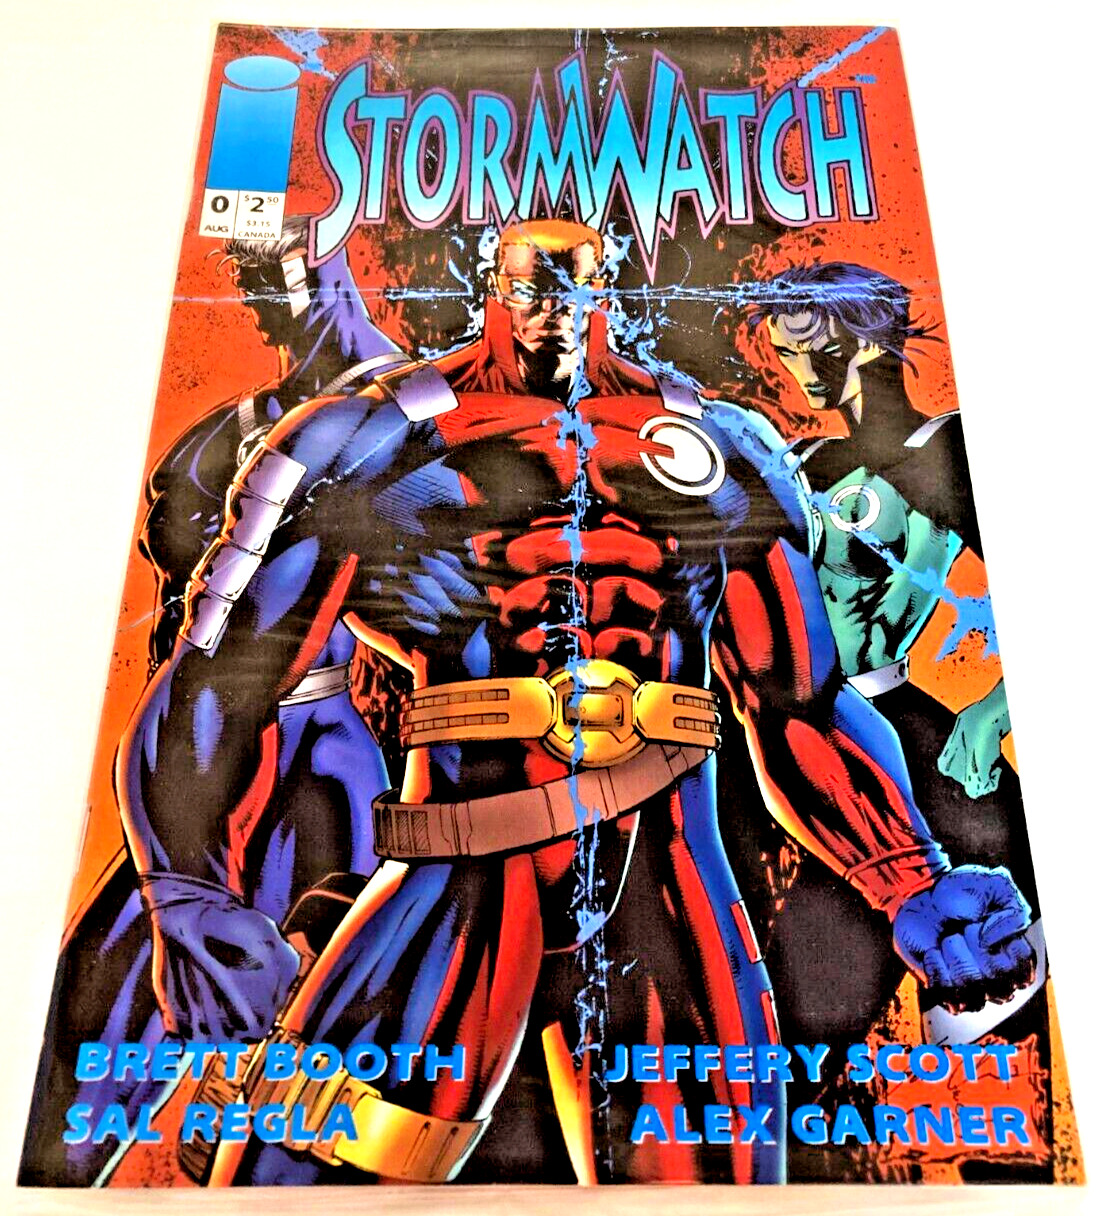 Stormwatch #0 1993 New in Polybag Image Comics Trading Card Included Comic Book